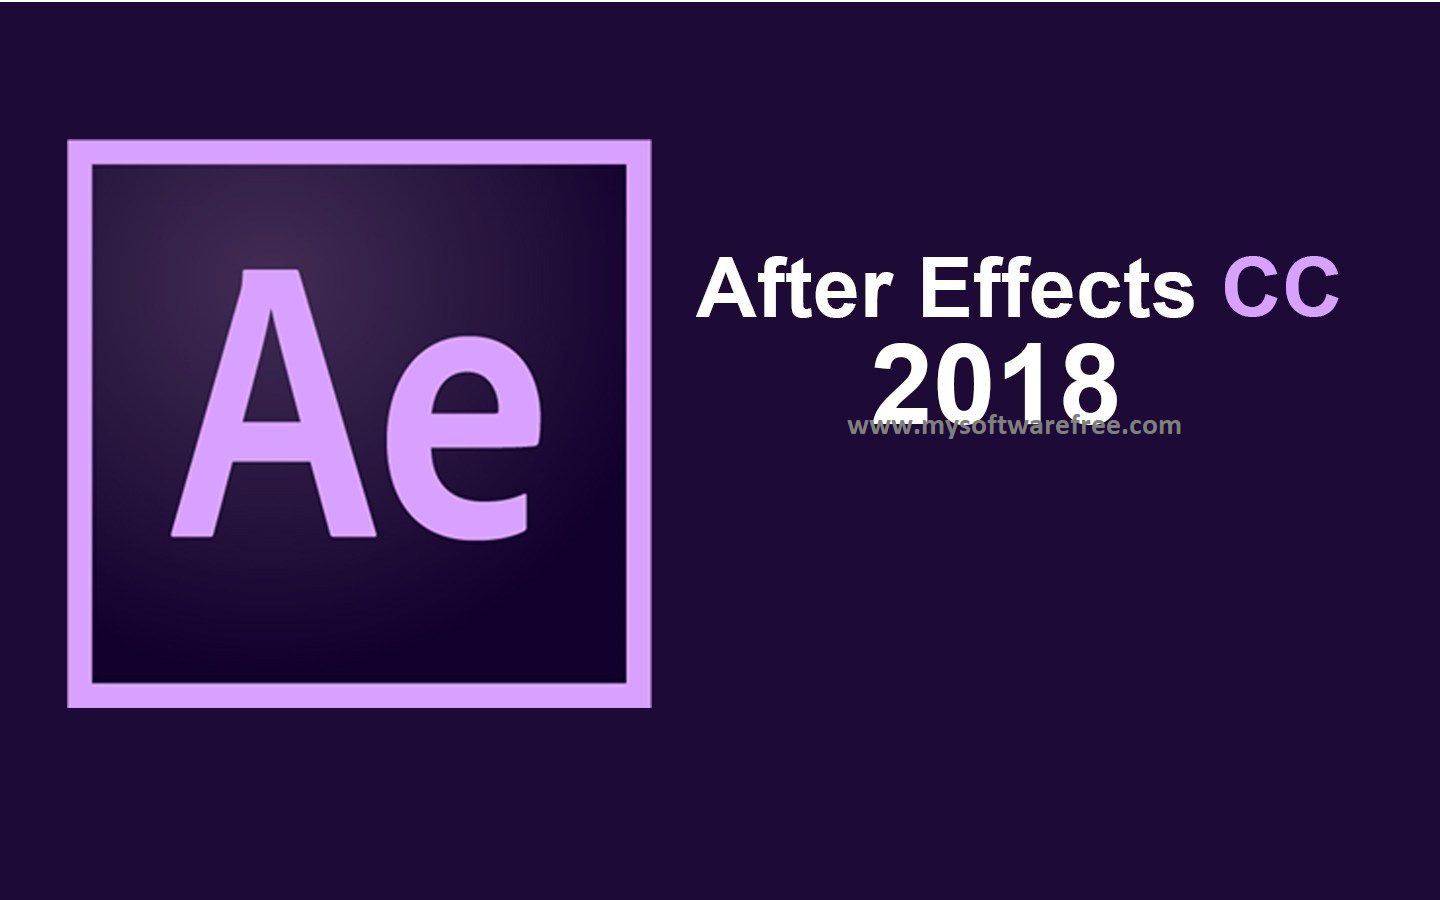 adobe after effects cc 2018 free download for windows 10